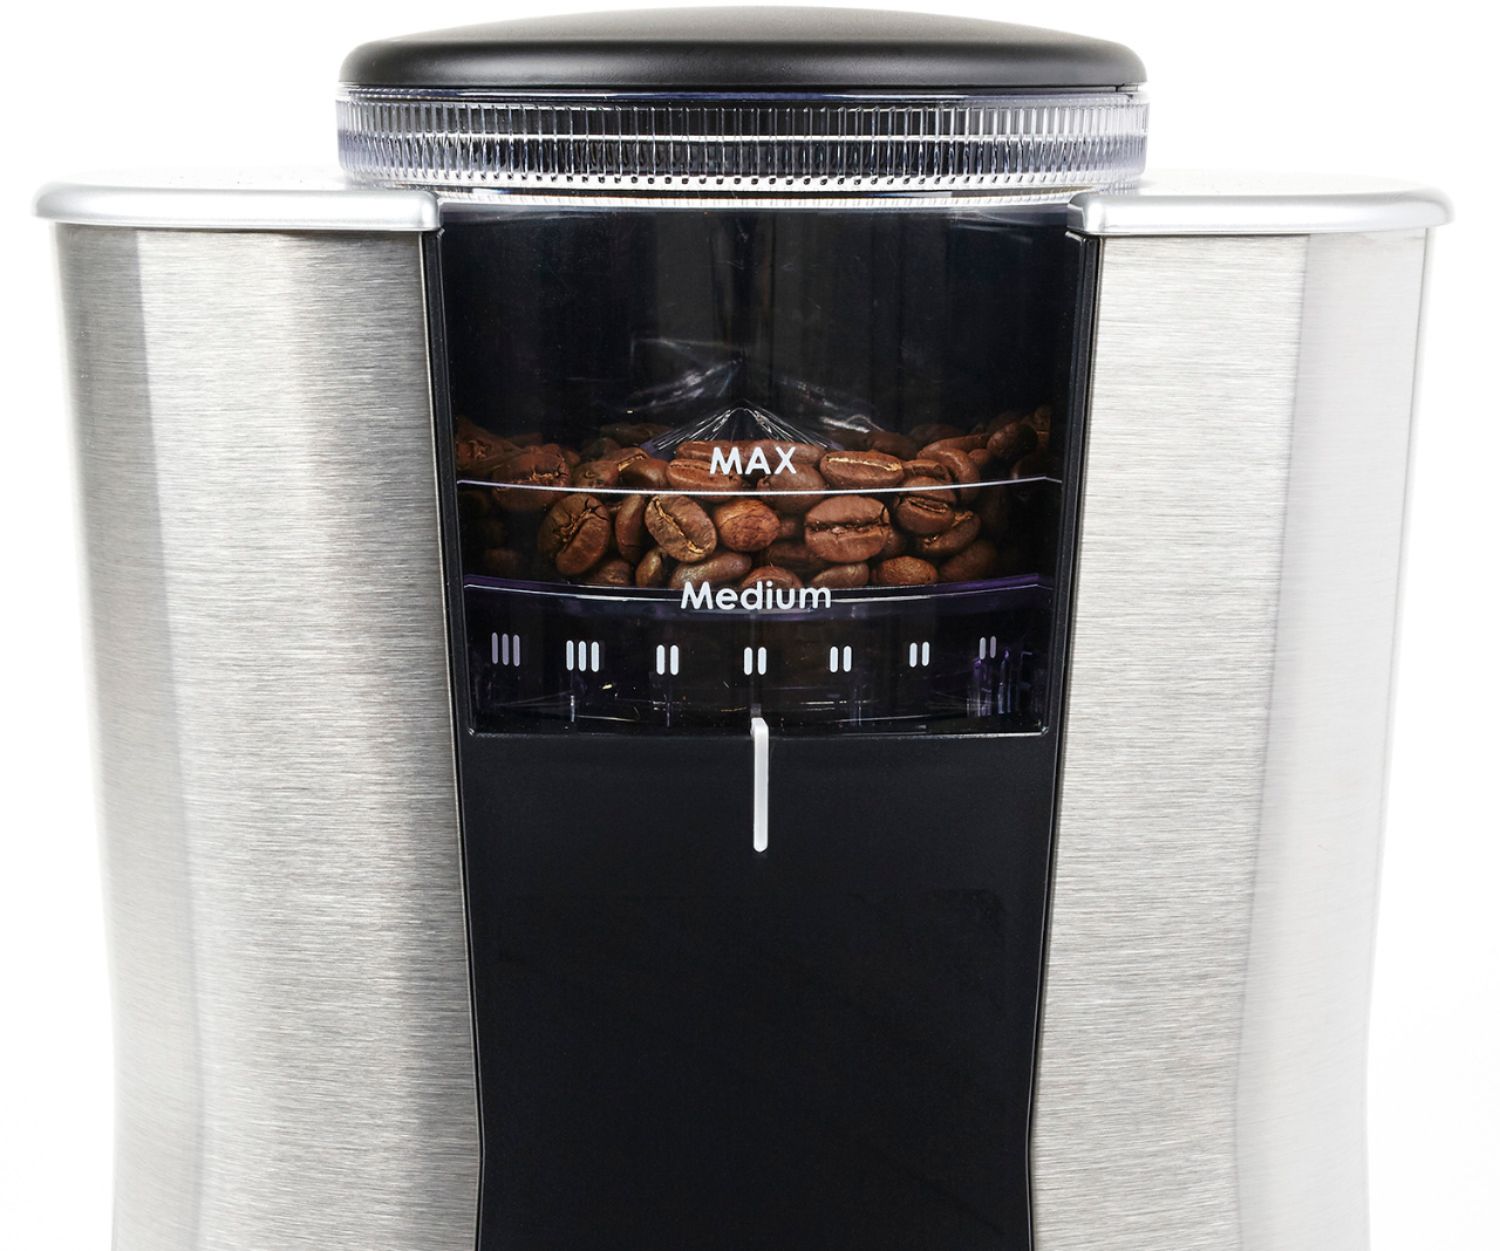 OXO Brew Time Based Conical Burr Coffee Grinder Stainless Steel 8717000 -  Best Buy